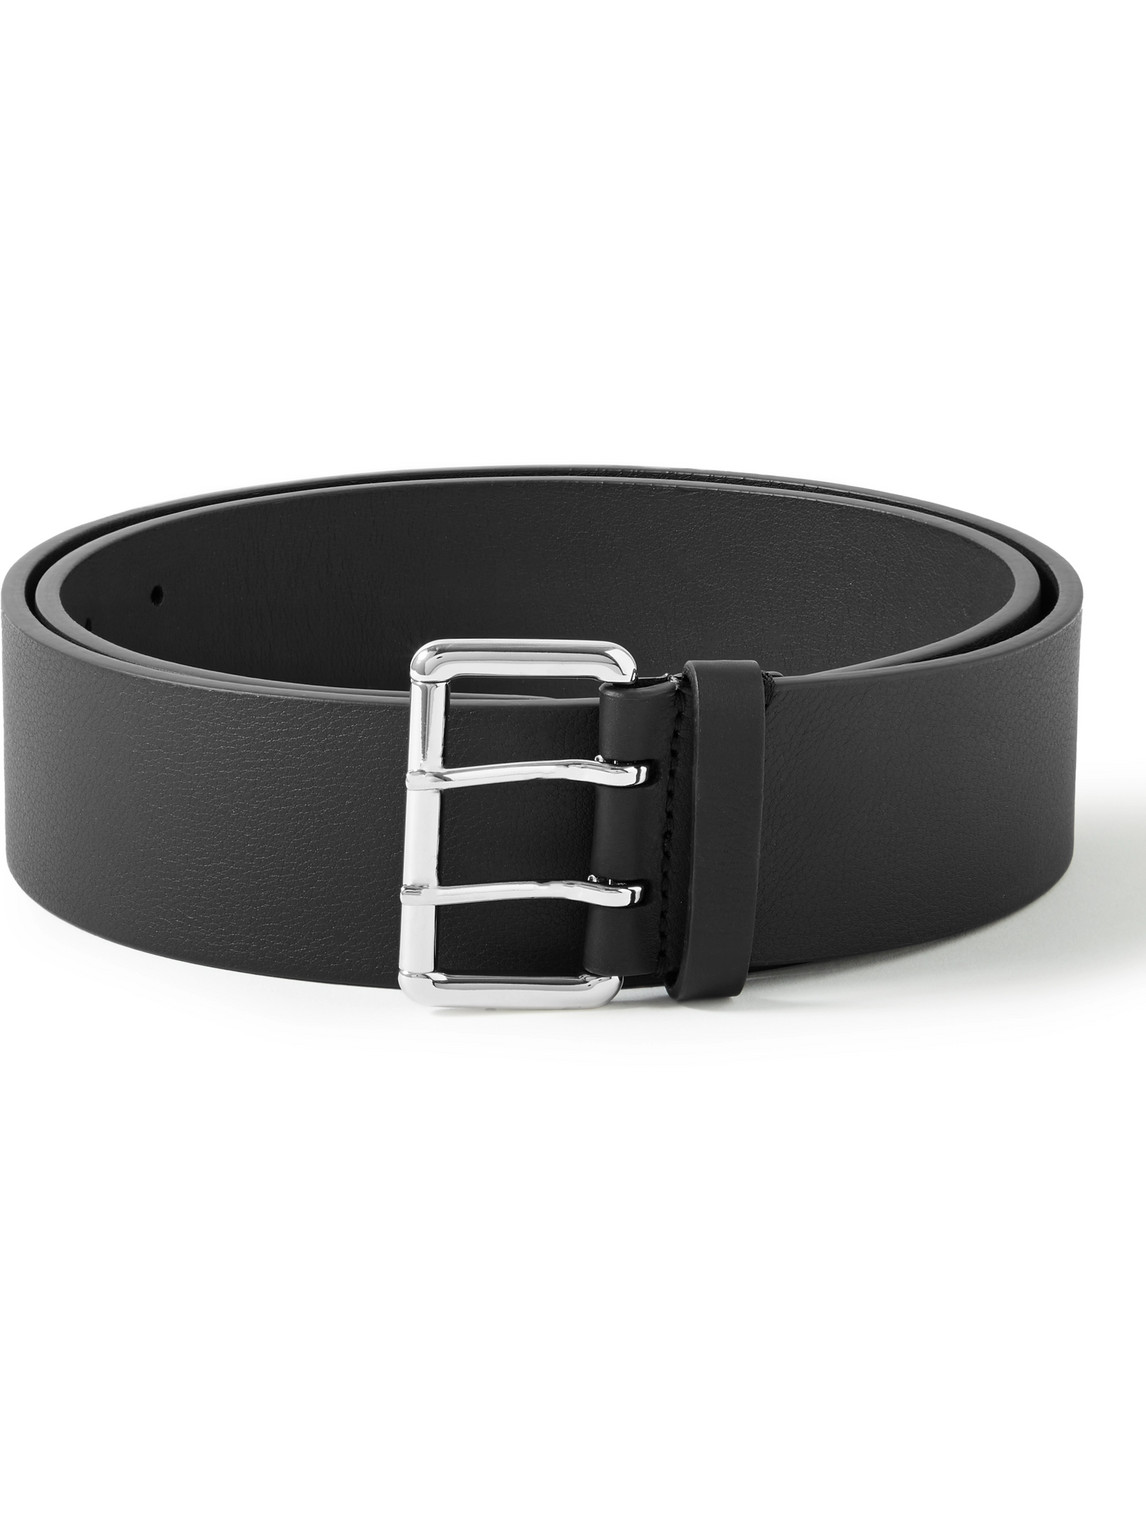 Anderson's 4.5cm Leather Belt In Black